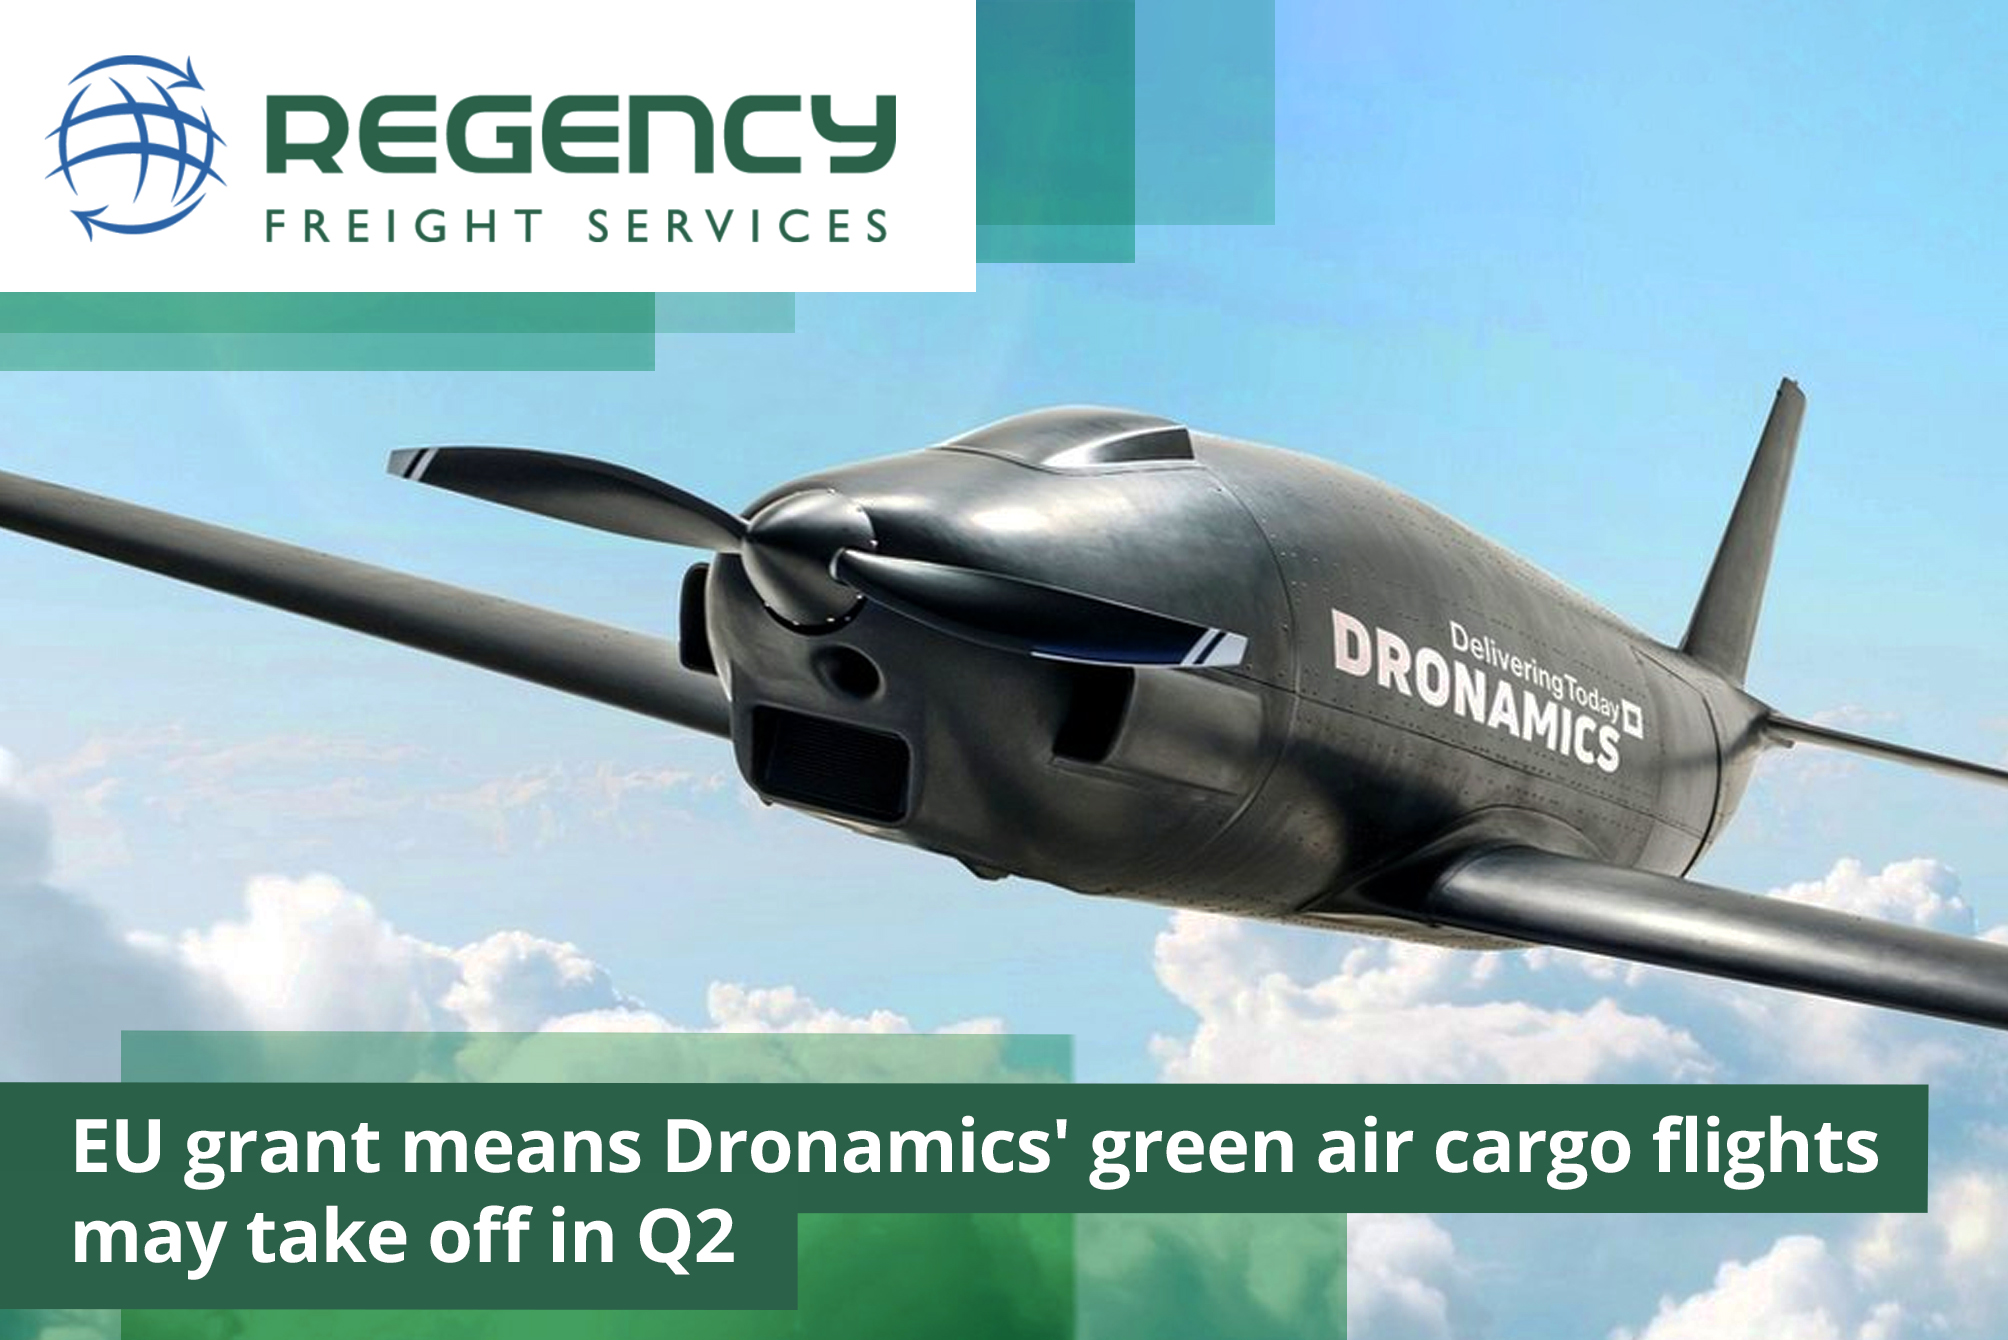 EU grant means Dronamics' green air cargo flights may take off in Q2